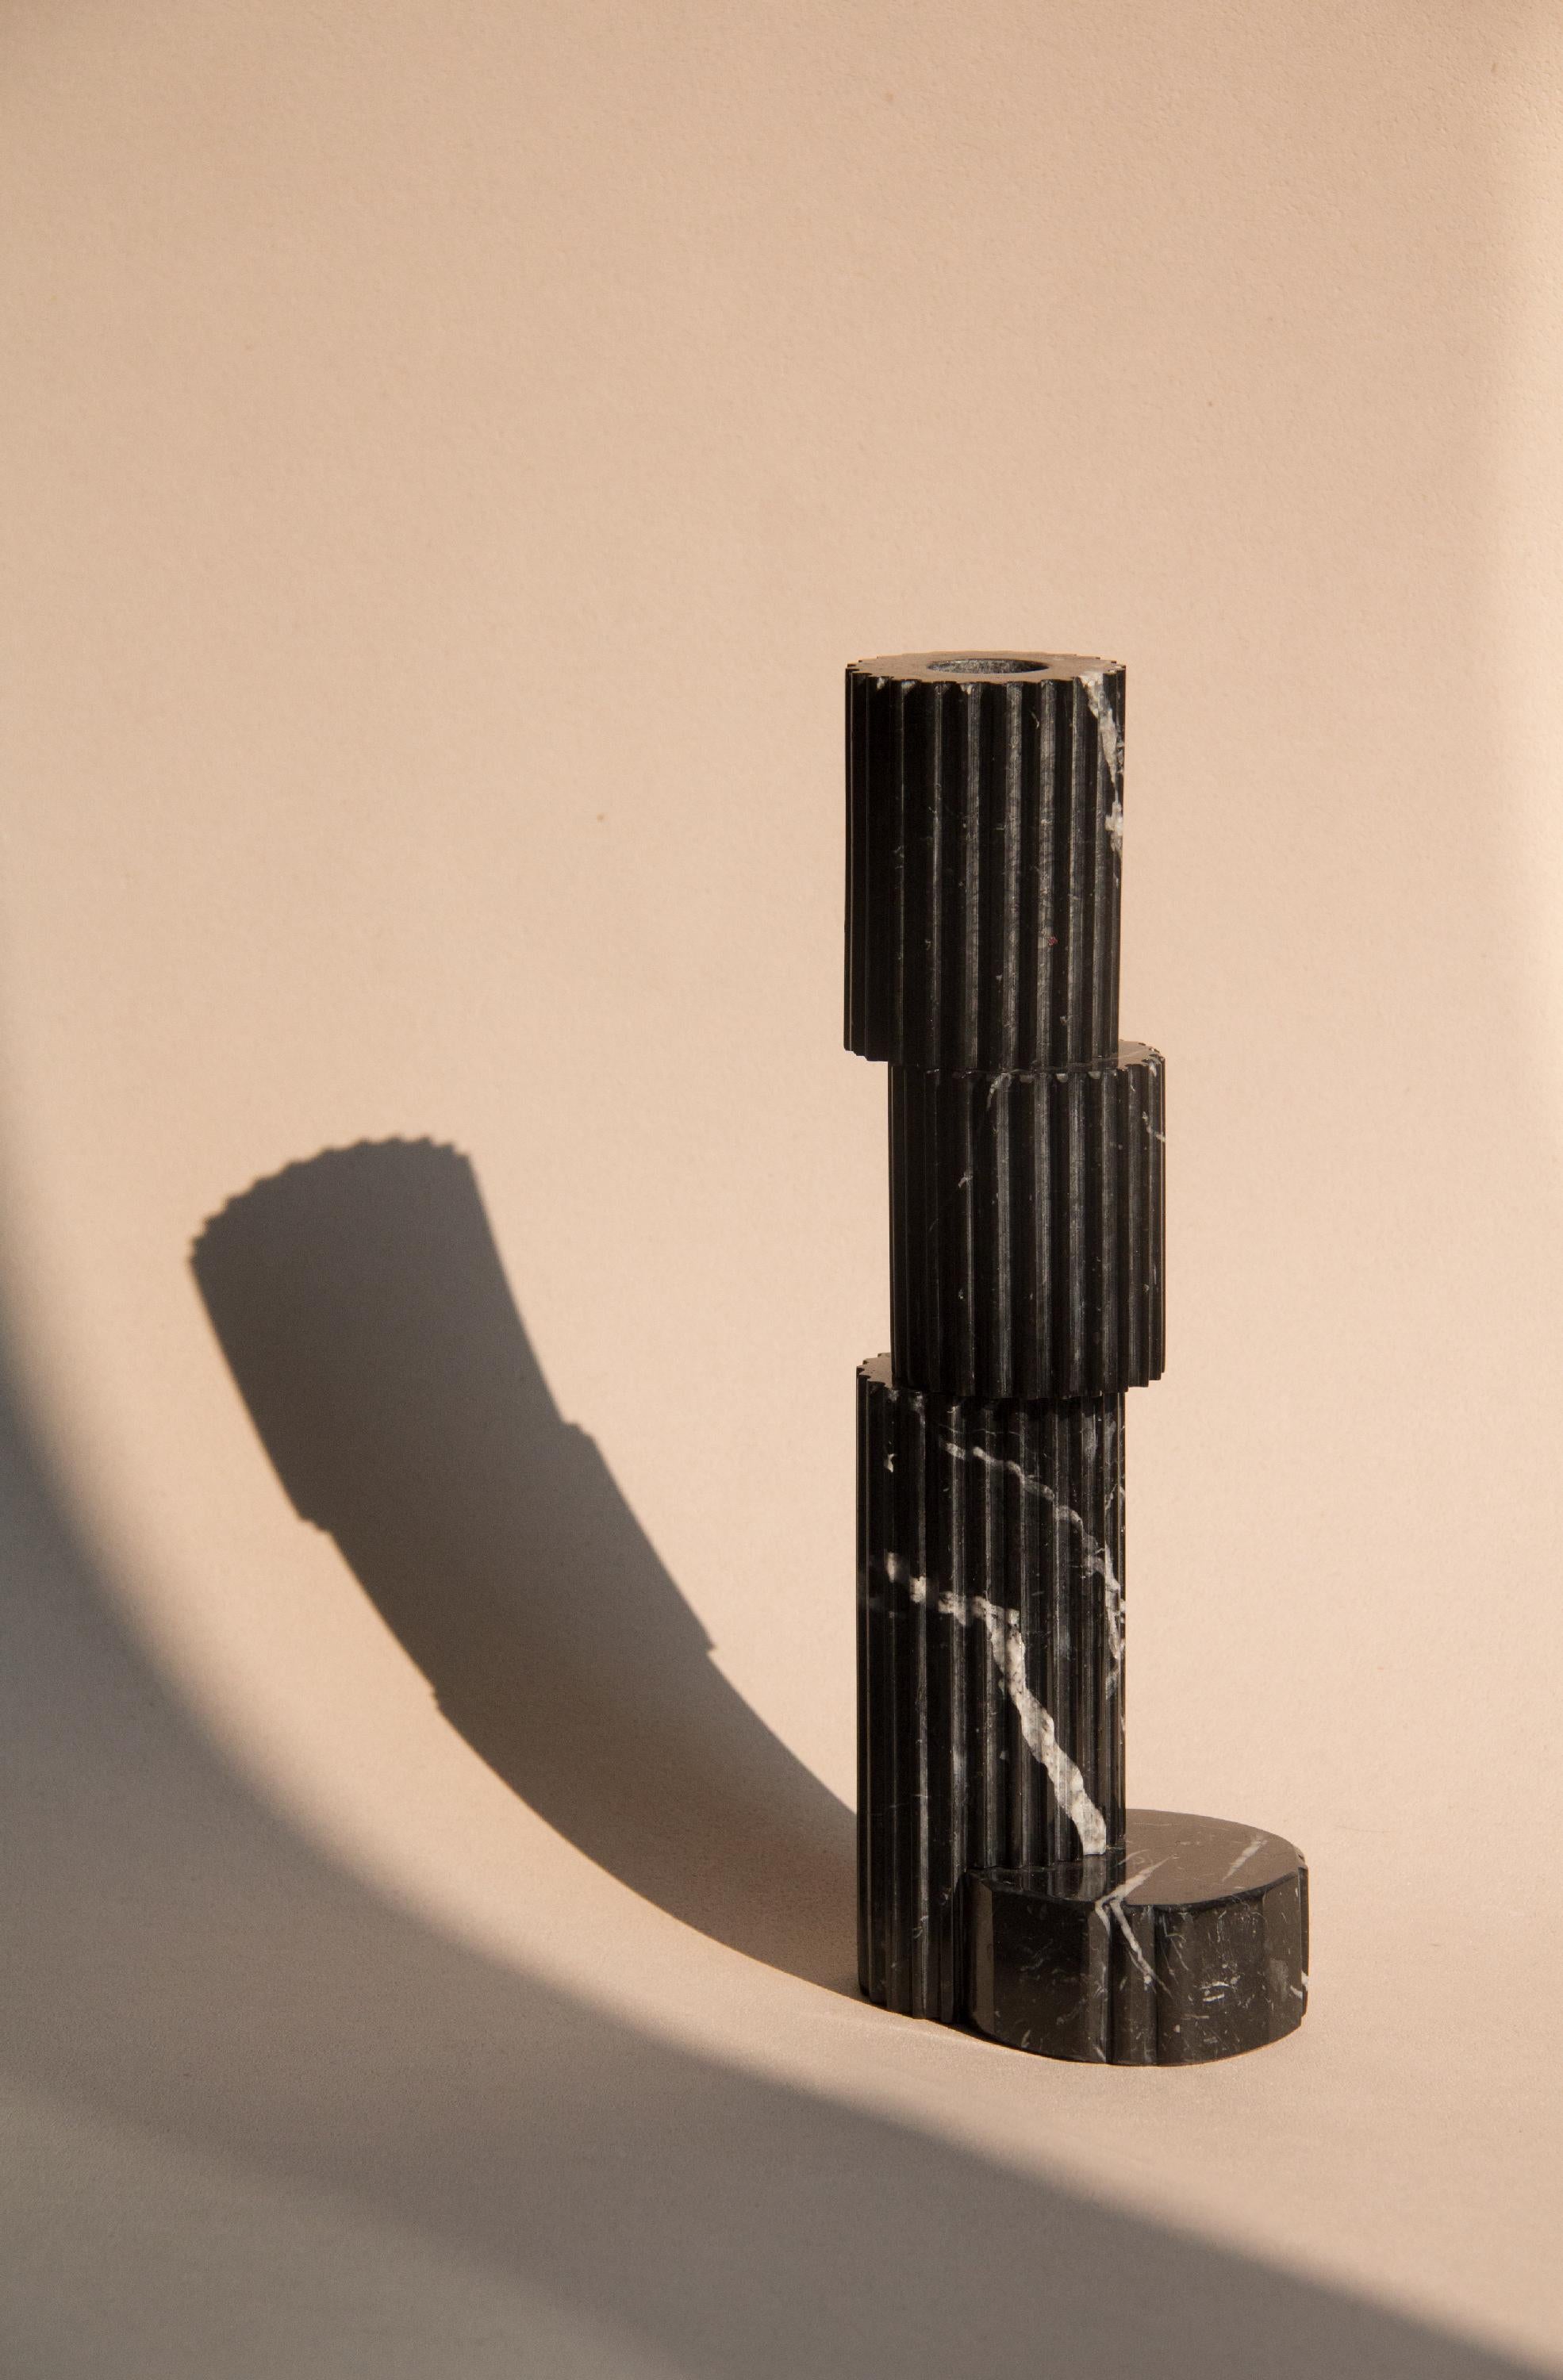 1 IN STOCK AVAILABLE NOW of these 21 Century Contemporary black marble Rovinette candleholders handmade in Italy by Ilaria Bianchi.

Hand-turned candleholder in black Marquinia marble produced by Italian artisans.
This Rovinette candleholder is born